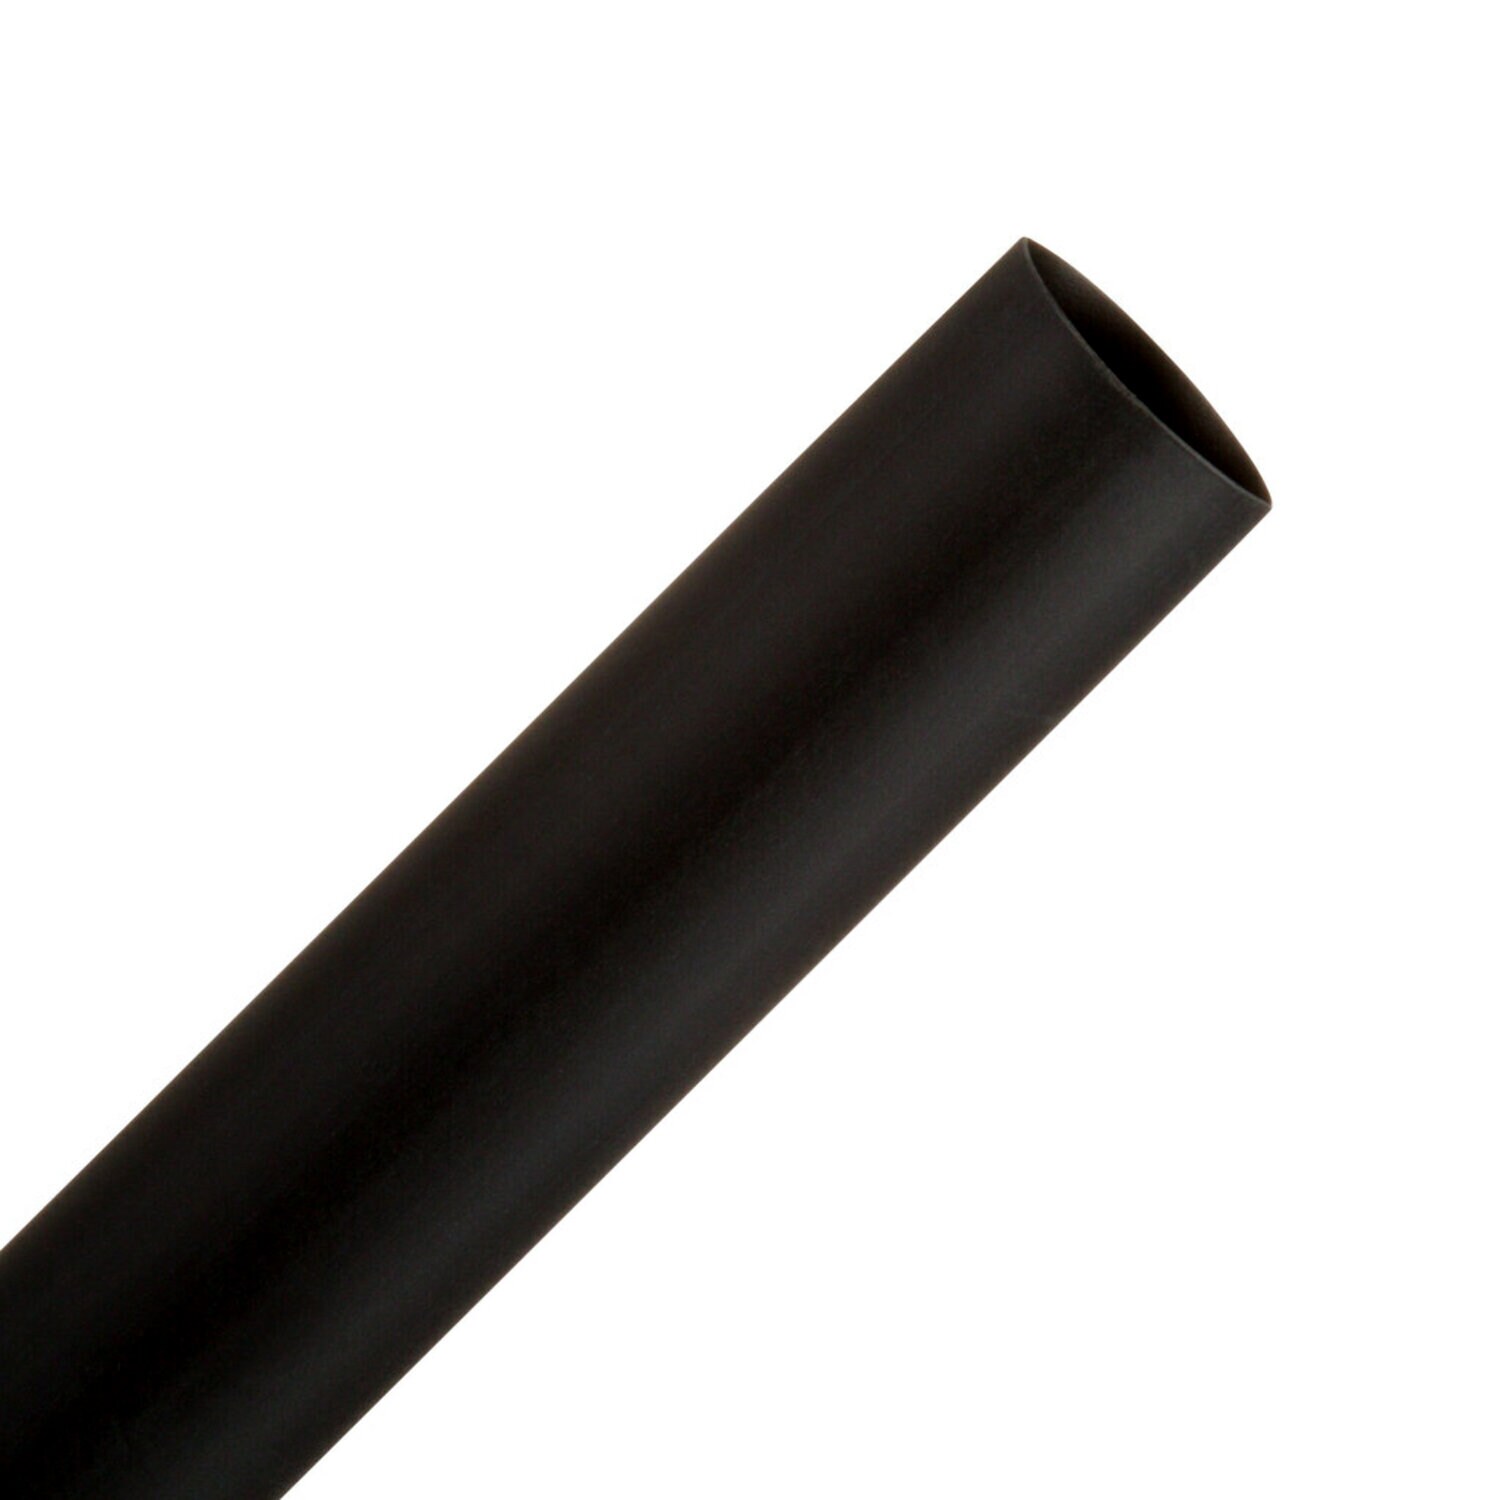 7000133514 - 3M Heat Shrink Thin-Wall Tubing FP-301-3/4-48"-Black-12 Pcs, 48 in
Length sticks, 12 pieces/case